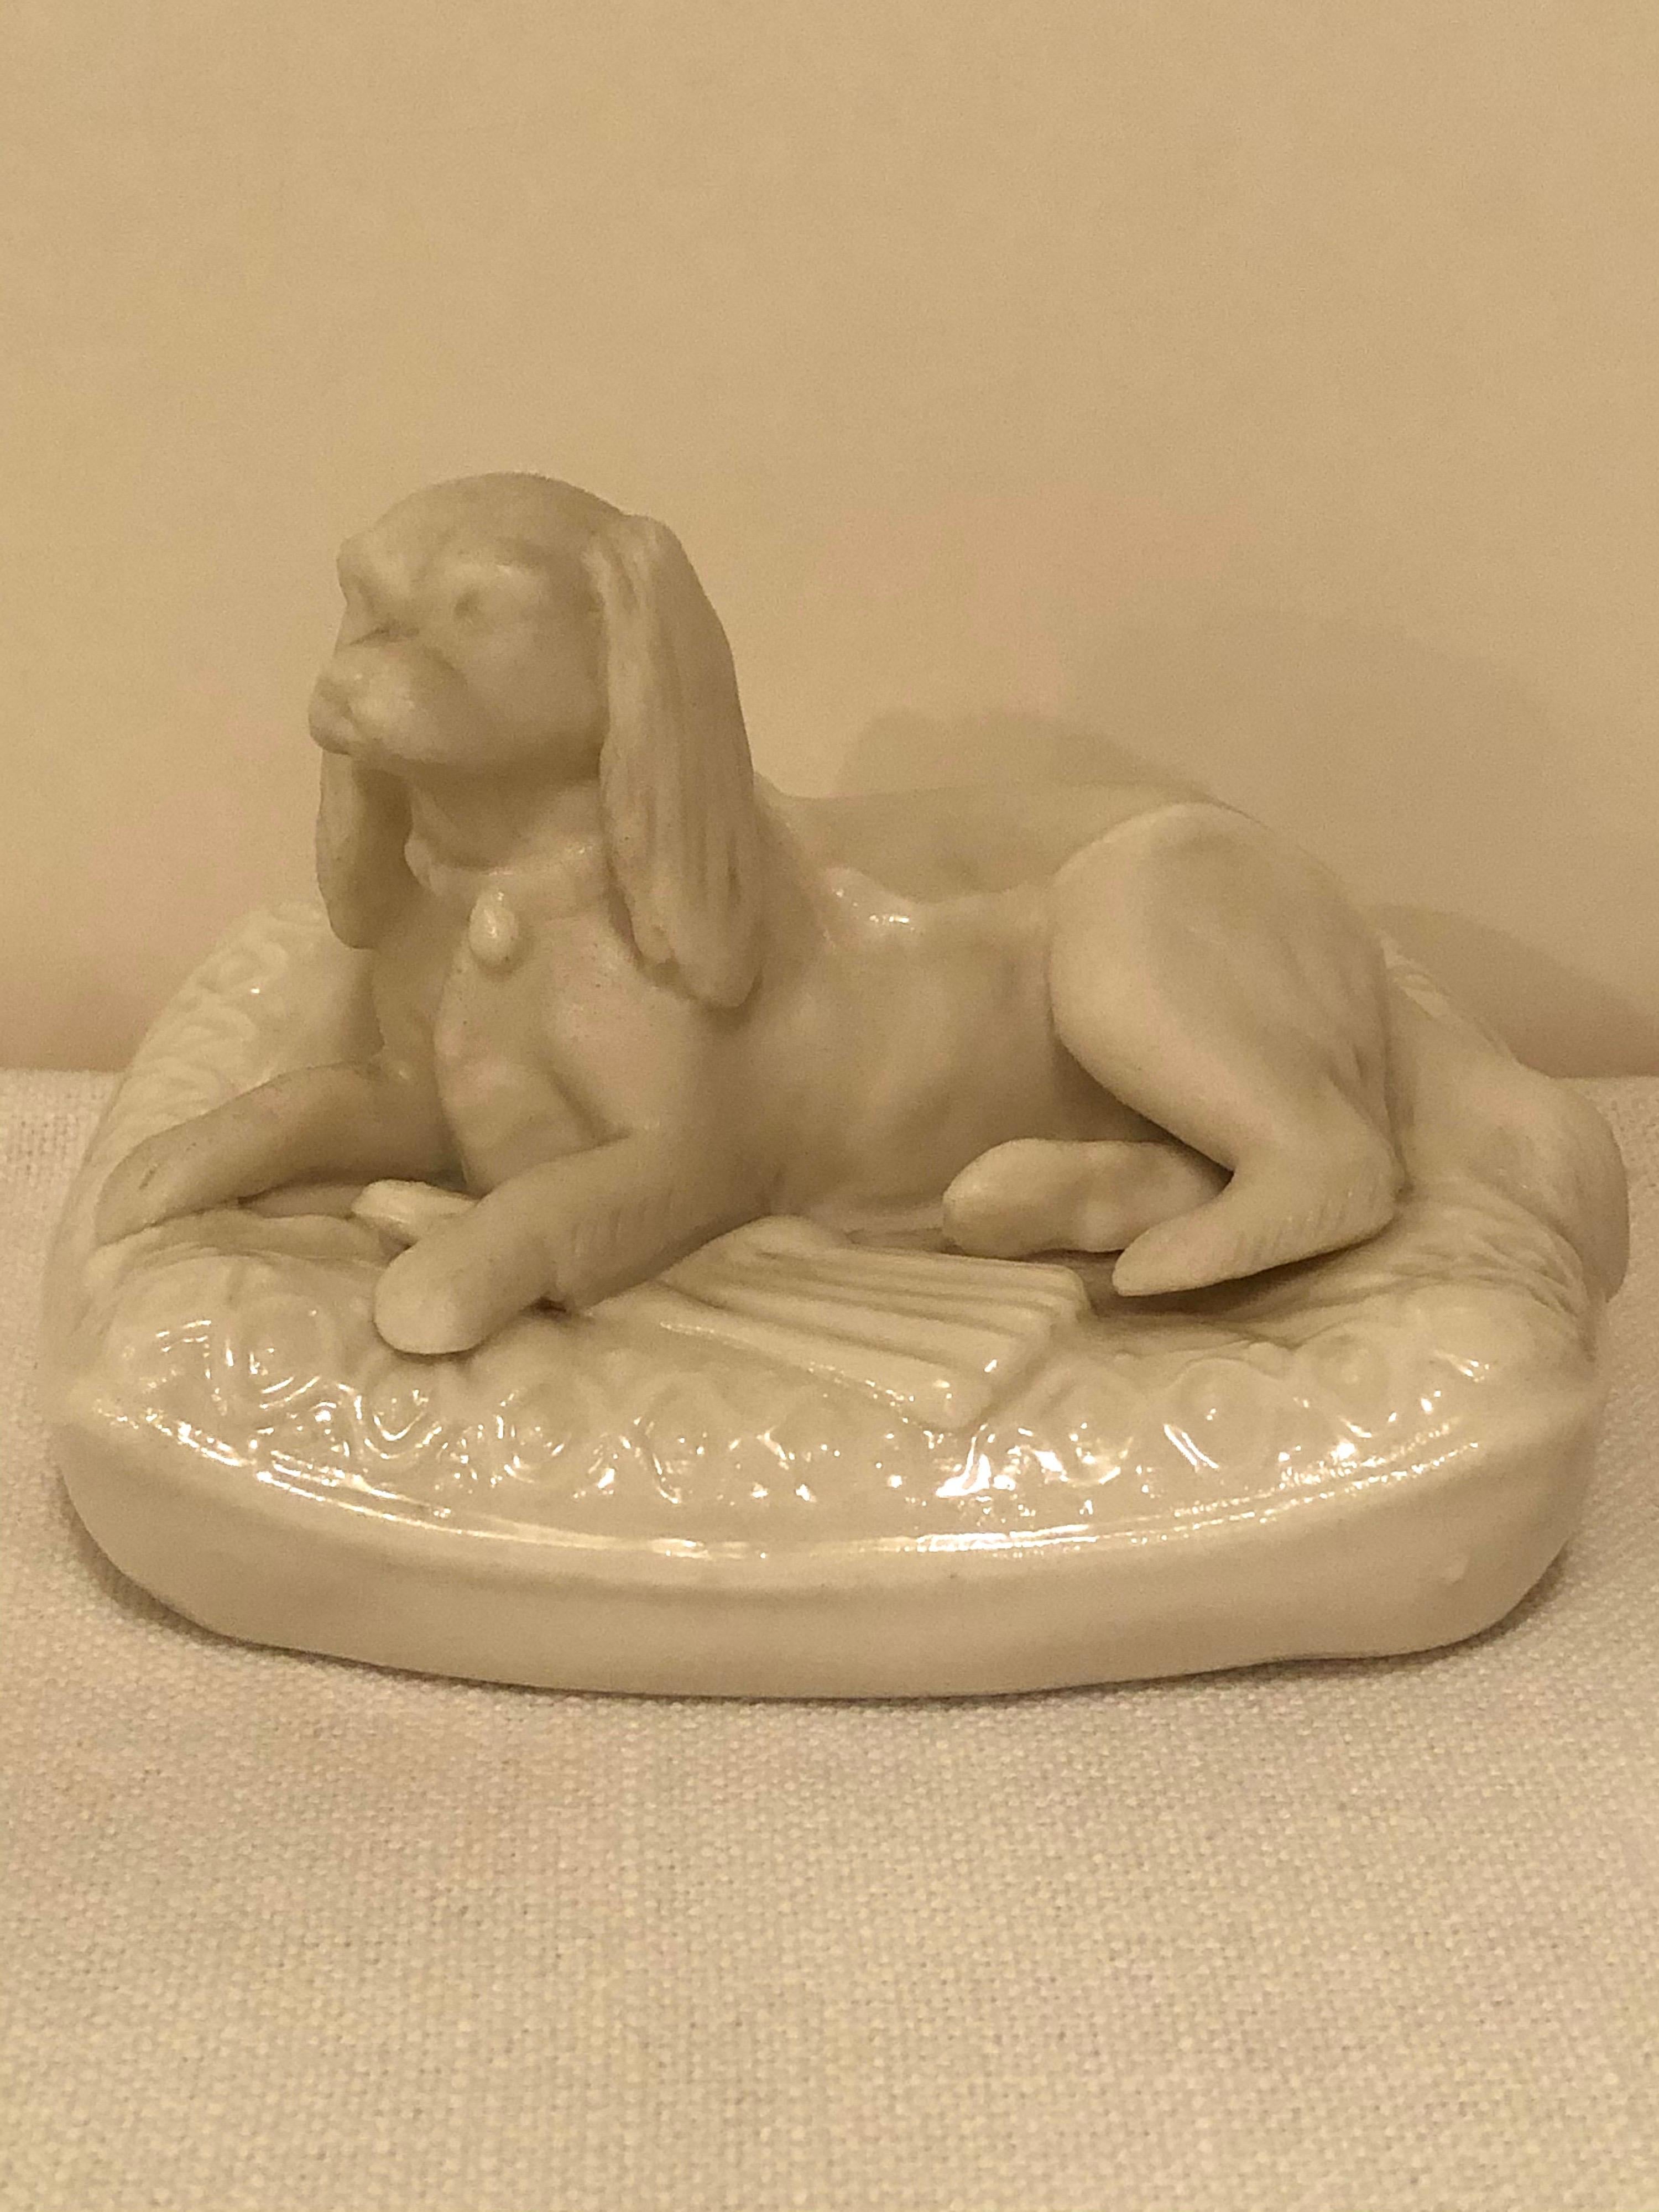 This is an adorable pair of rare Irish Belleek figures of doggies on their pillow beds. I have never seen a pair like these in 30 years. These would be a fabulous addition to any Belleek collection. They would also be an enchanting decoration for